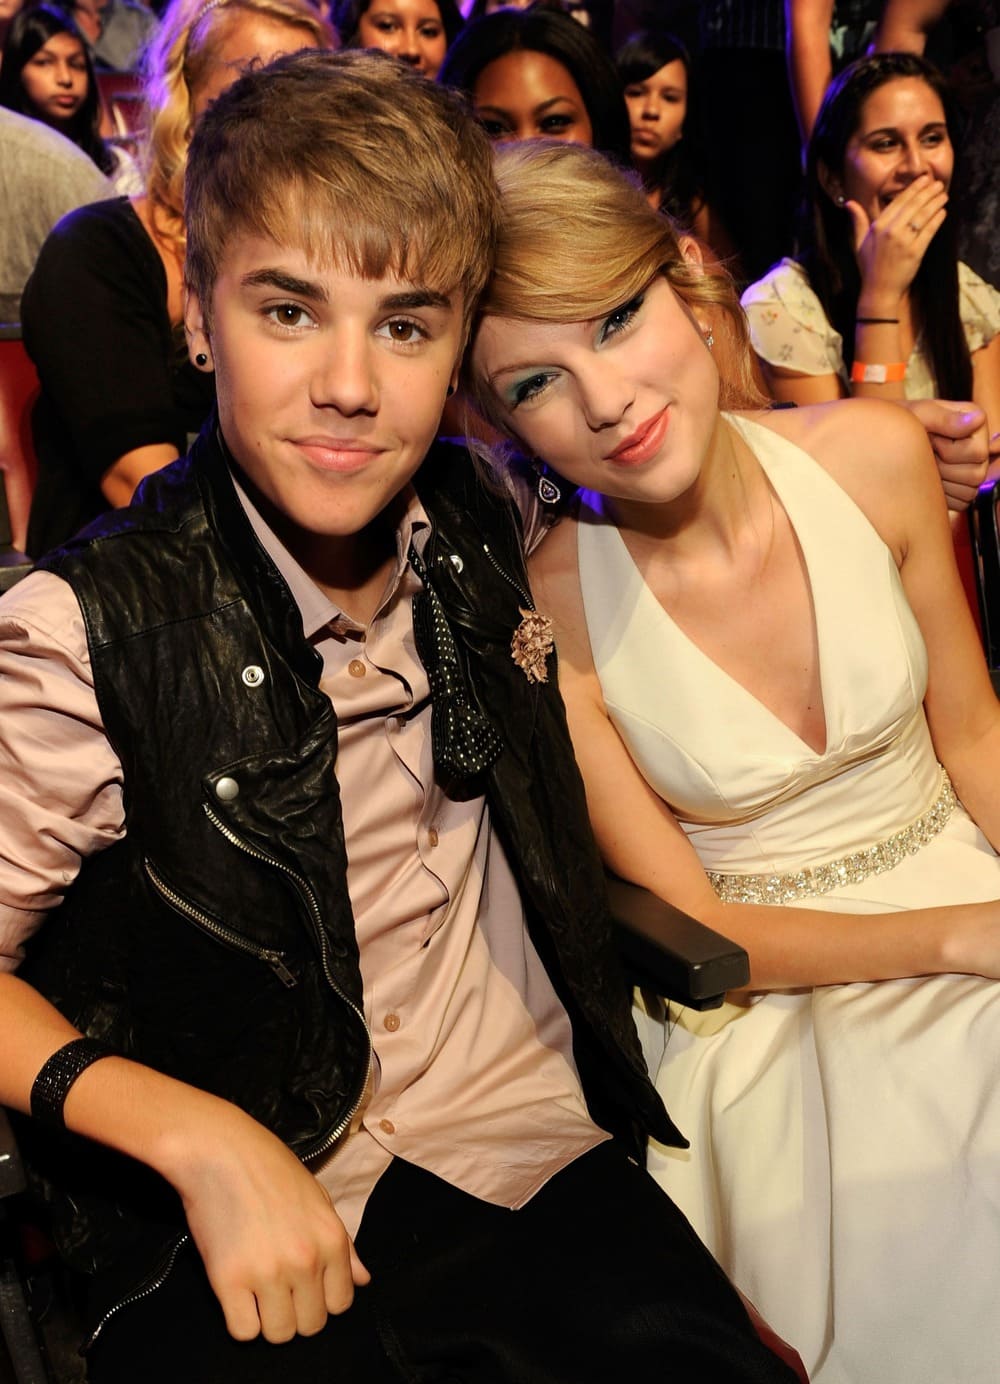 Justin Bieber and Taylor Swift were once a famous teenage couple in the entertainment industry. Photo: People